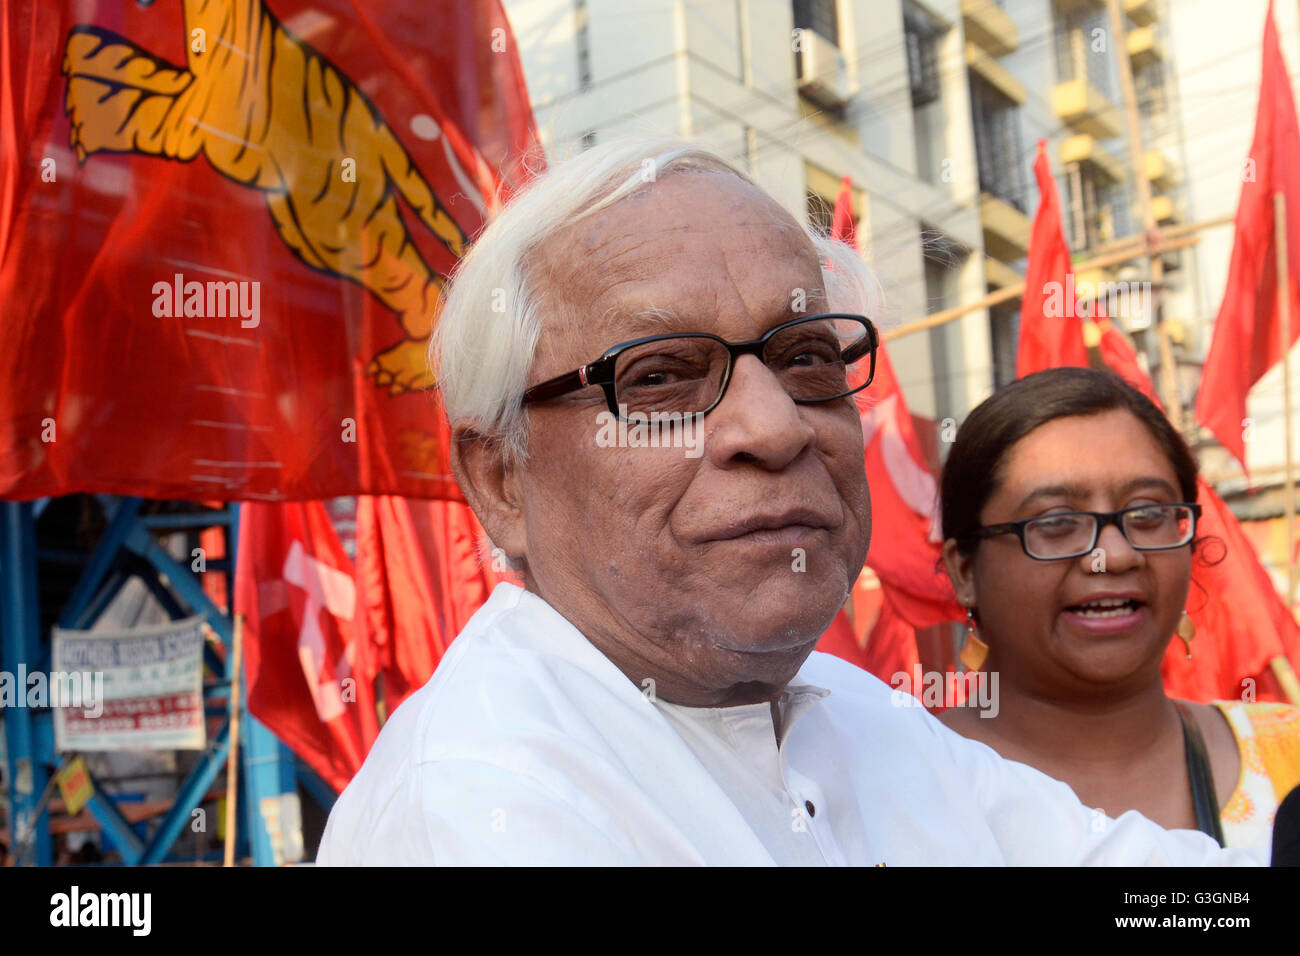 Kolkata, India. 19th Apr, 2016. Ex Chief Minister of West Bengal and C.P.I. (M) Politburo member Buddhadeb Bhattacharjee lead Congress Left Front alliance election campaign rally for their three candidates Satarup Ghosh(Kasba), Maduja Sen Roy (Tollygunj) and Sujan Chakroborty(Jadavpur) for ongoing assembly election. The massive rally start from Dhakuria bus stand and ended at Garia More. © Saikat Paul/Pacific Press/Alamy Live News Stock Photo